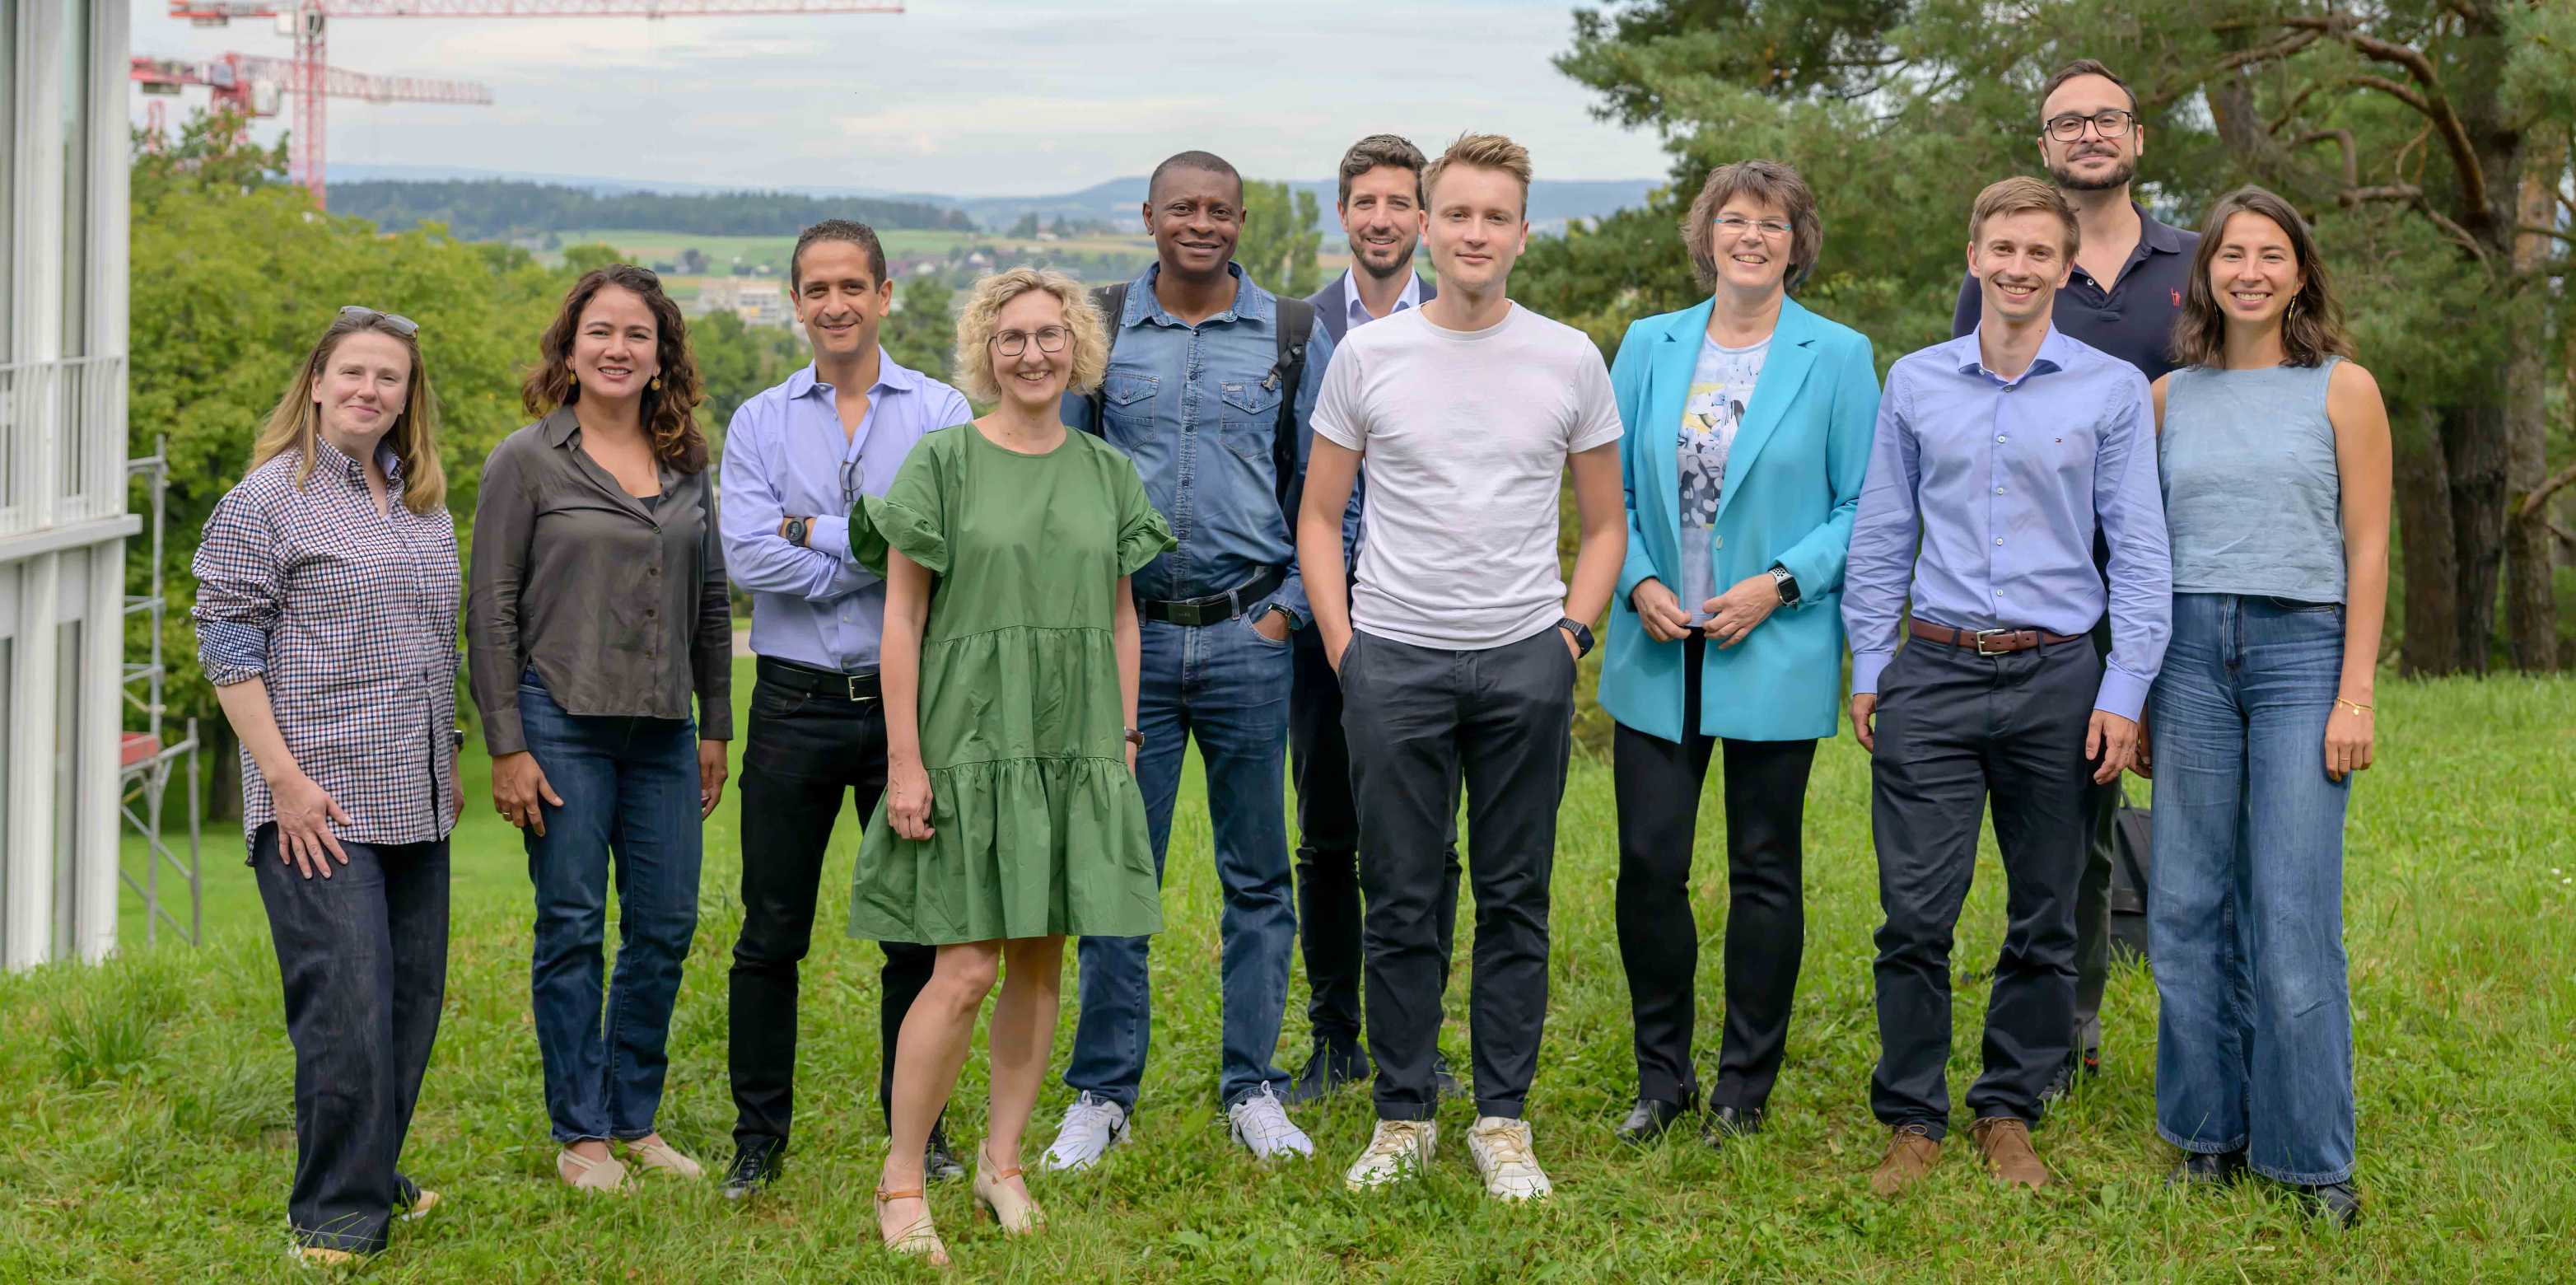 Group of clinical research professionals studying at ETH, image taken at Hönggerberg Campus